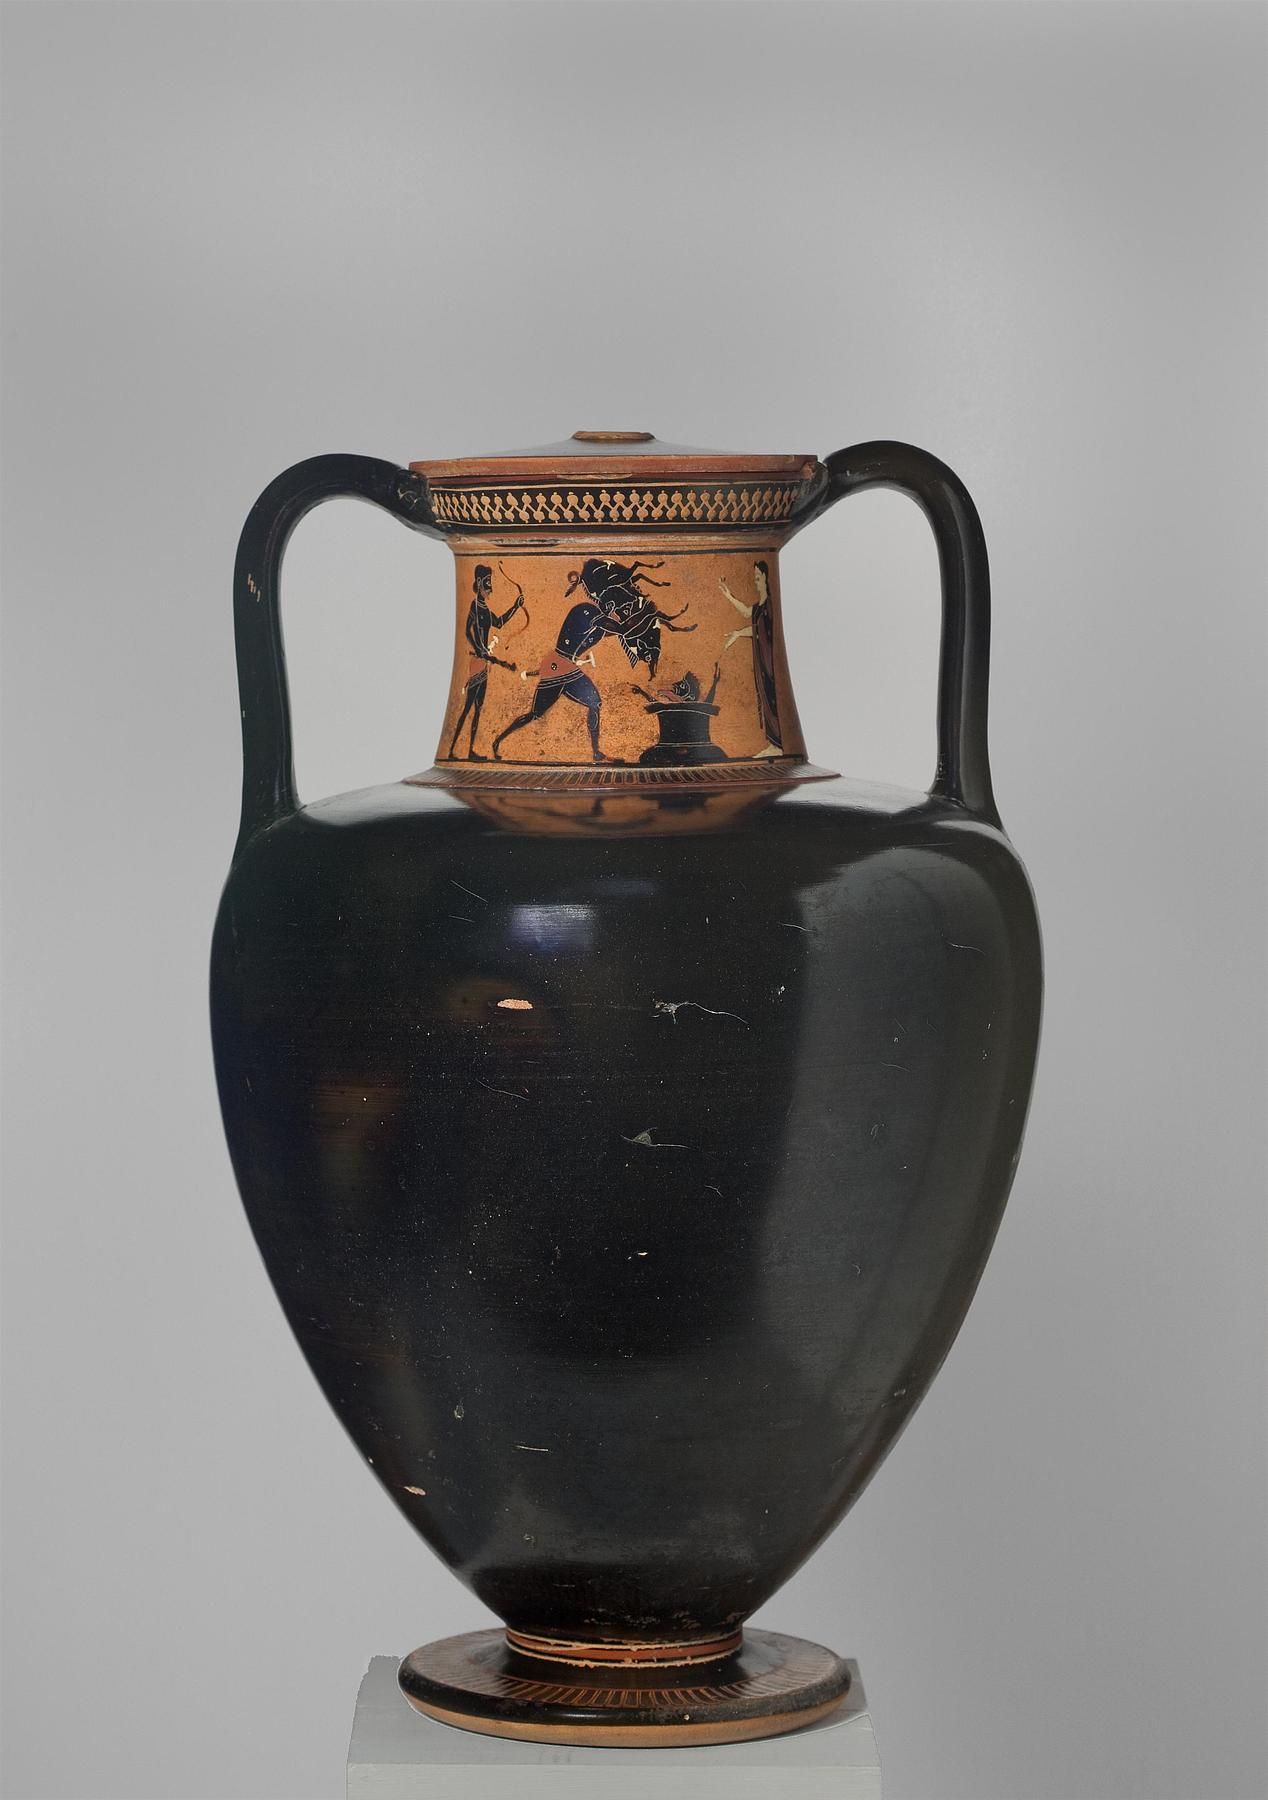 Amphora with Dionysus between dancing sileni (A) and Heracles with the Erymanthian boar (B), H538